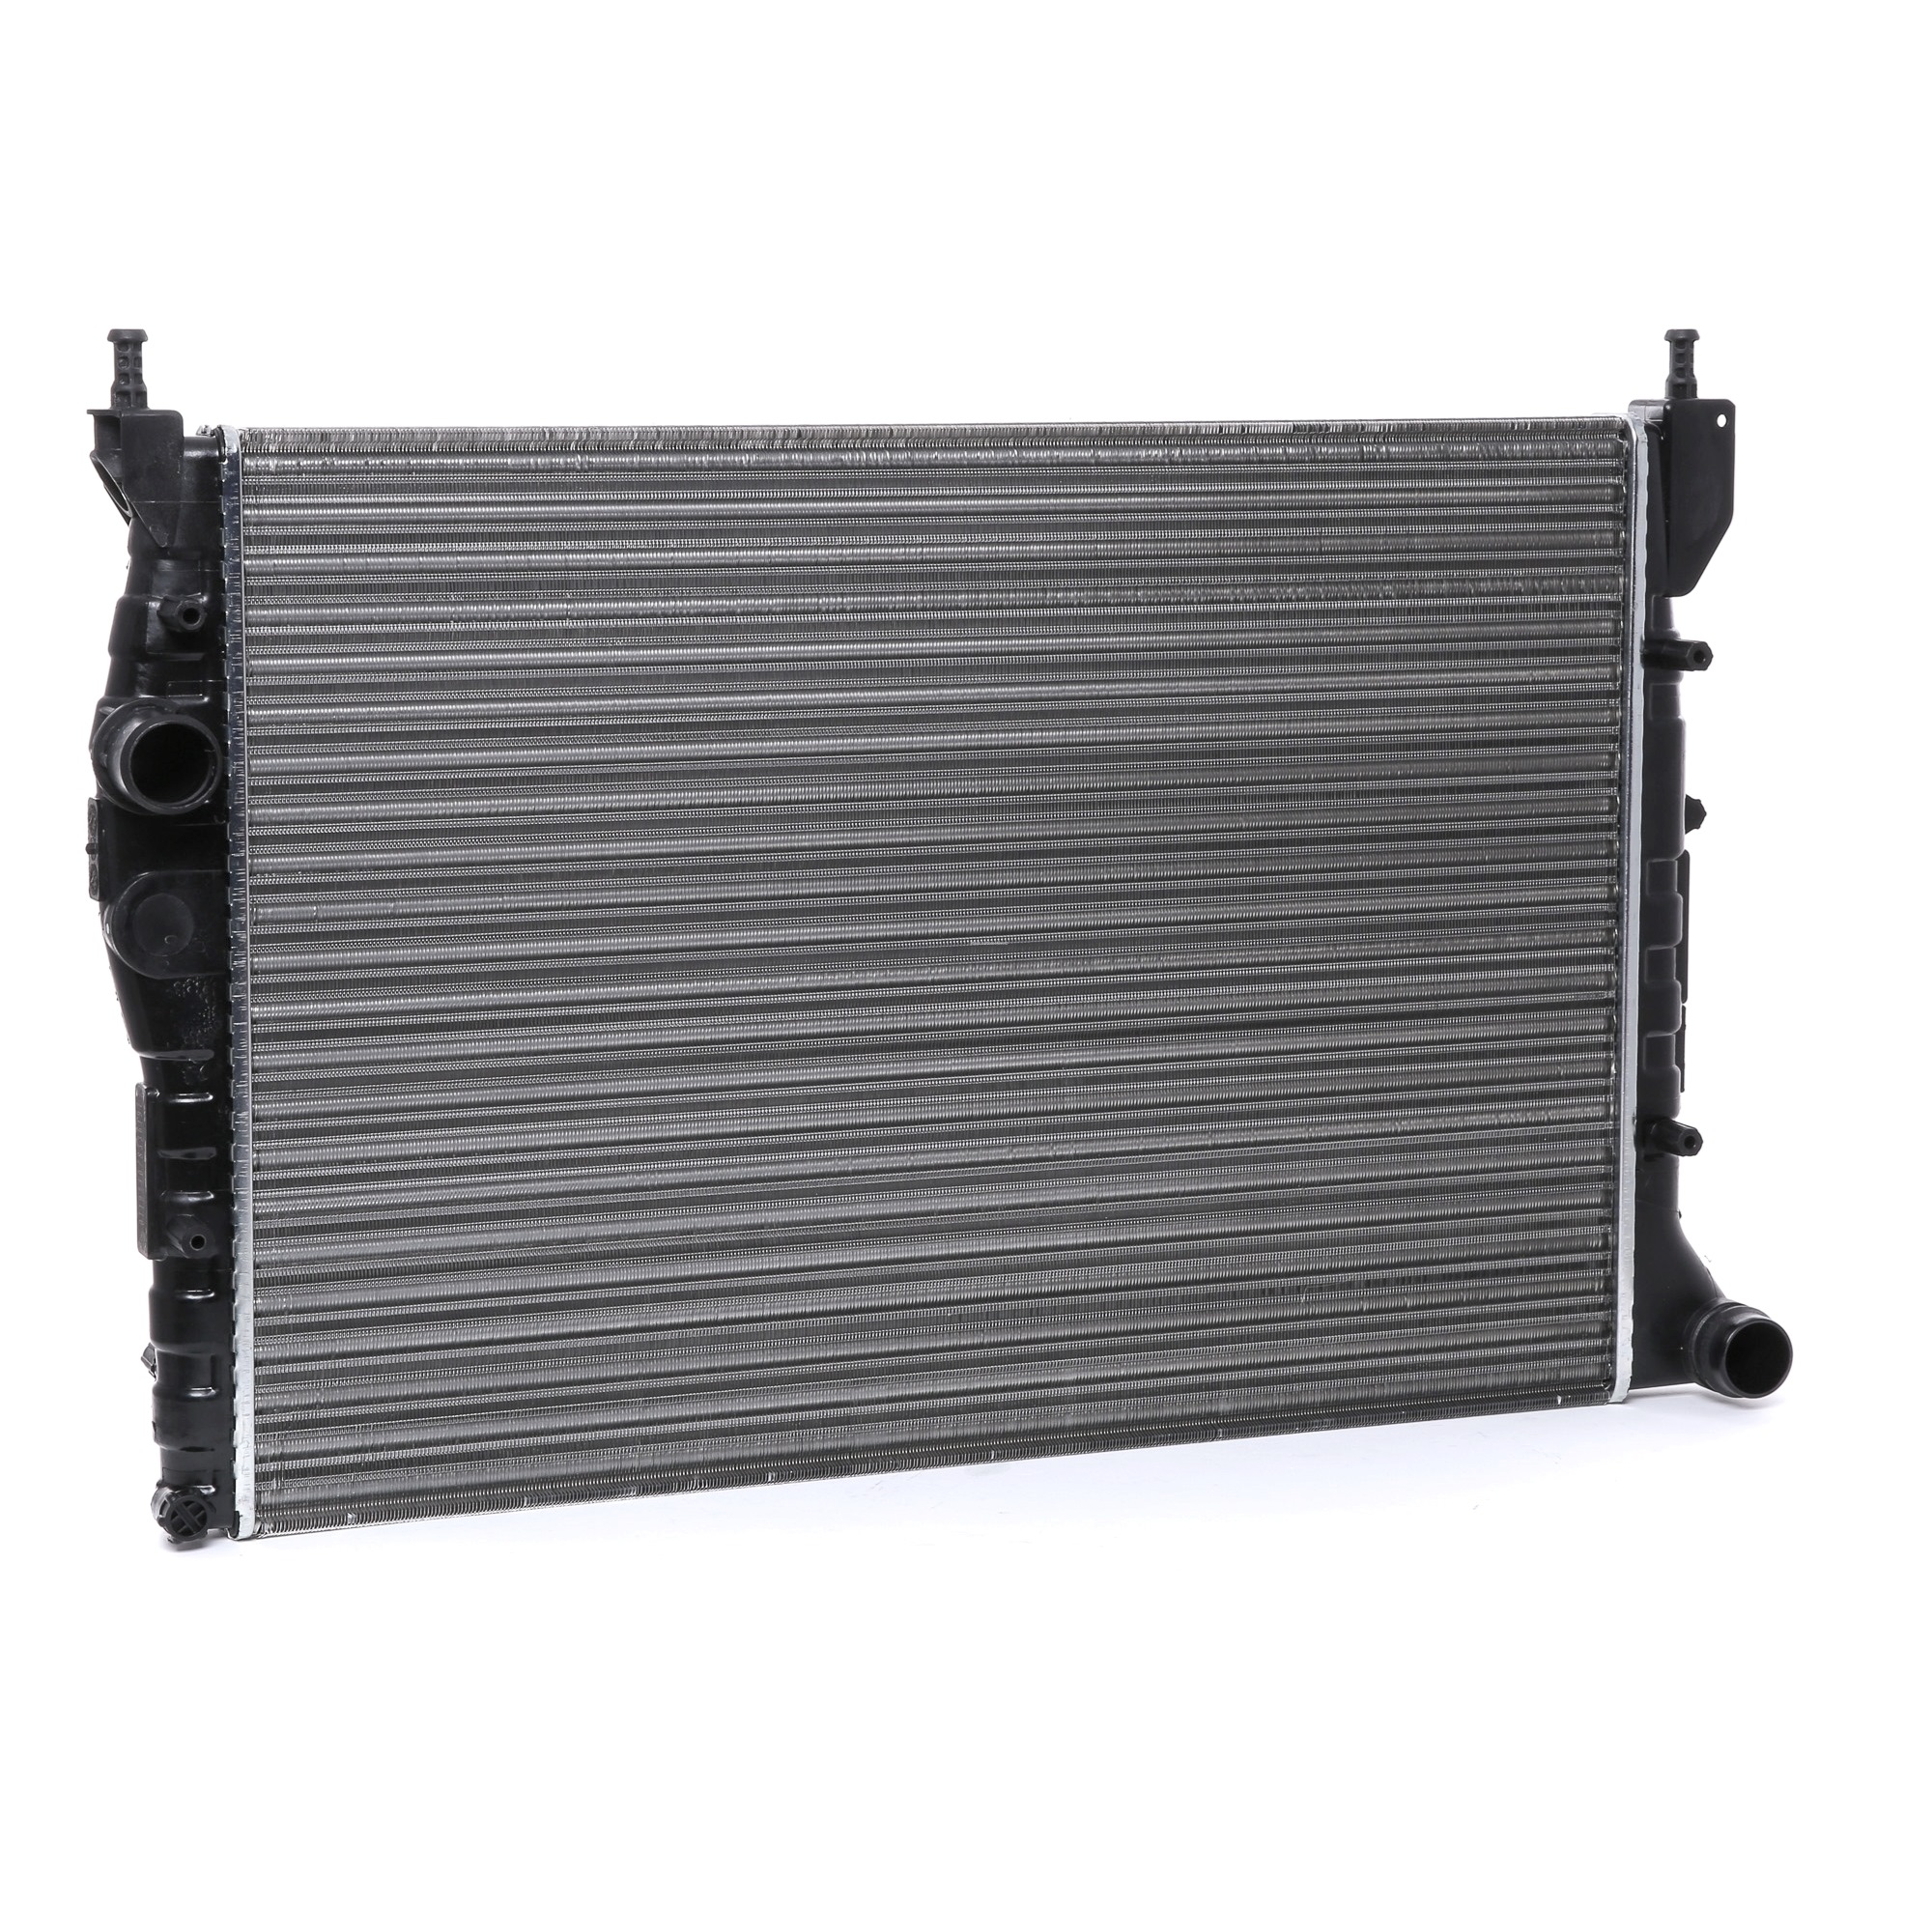 STARK Aluminium, 580 x 415 x 34 mm, without frame, Mechanically jointed cooling fins Radiator SKRD-0120611 buy